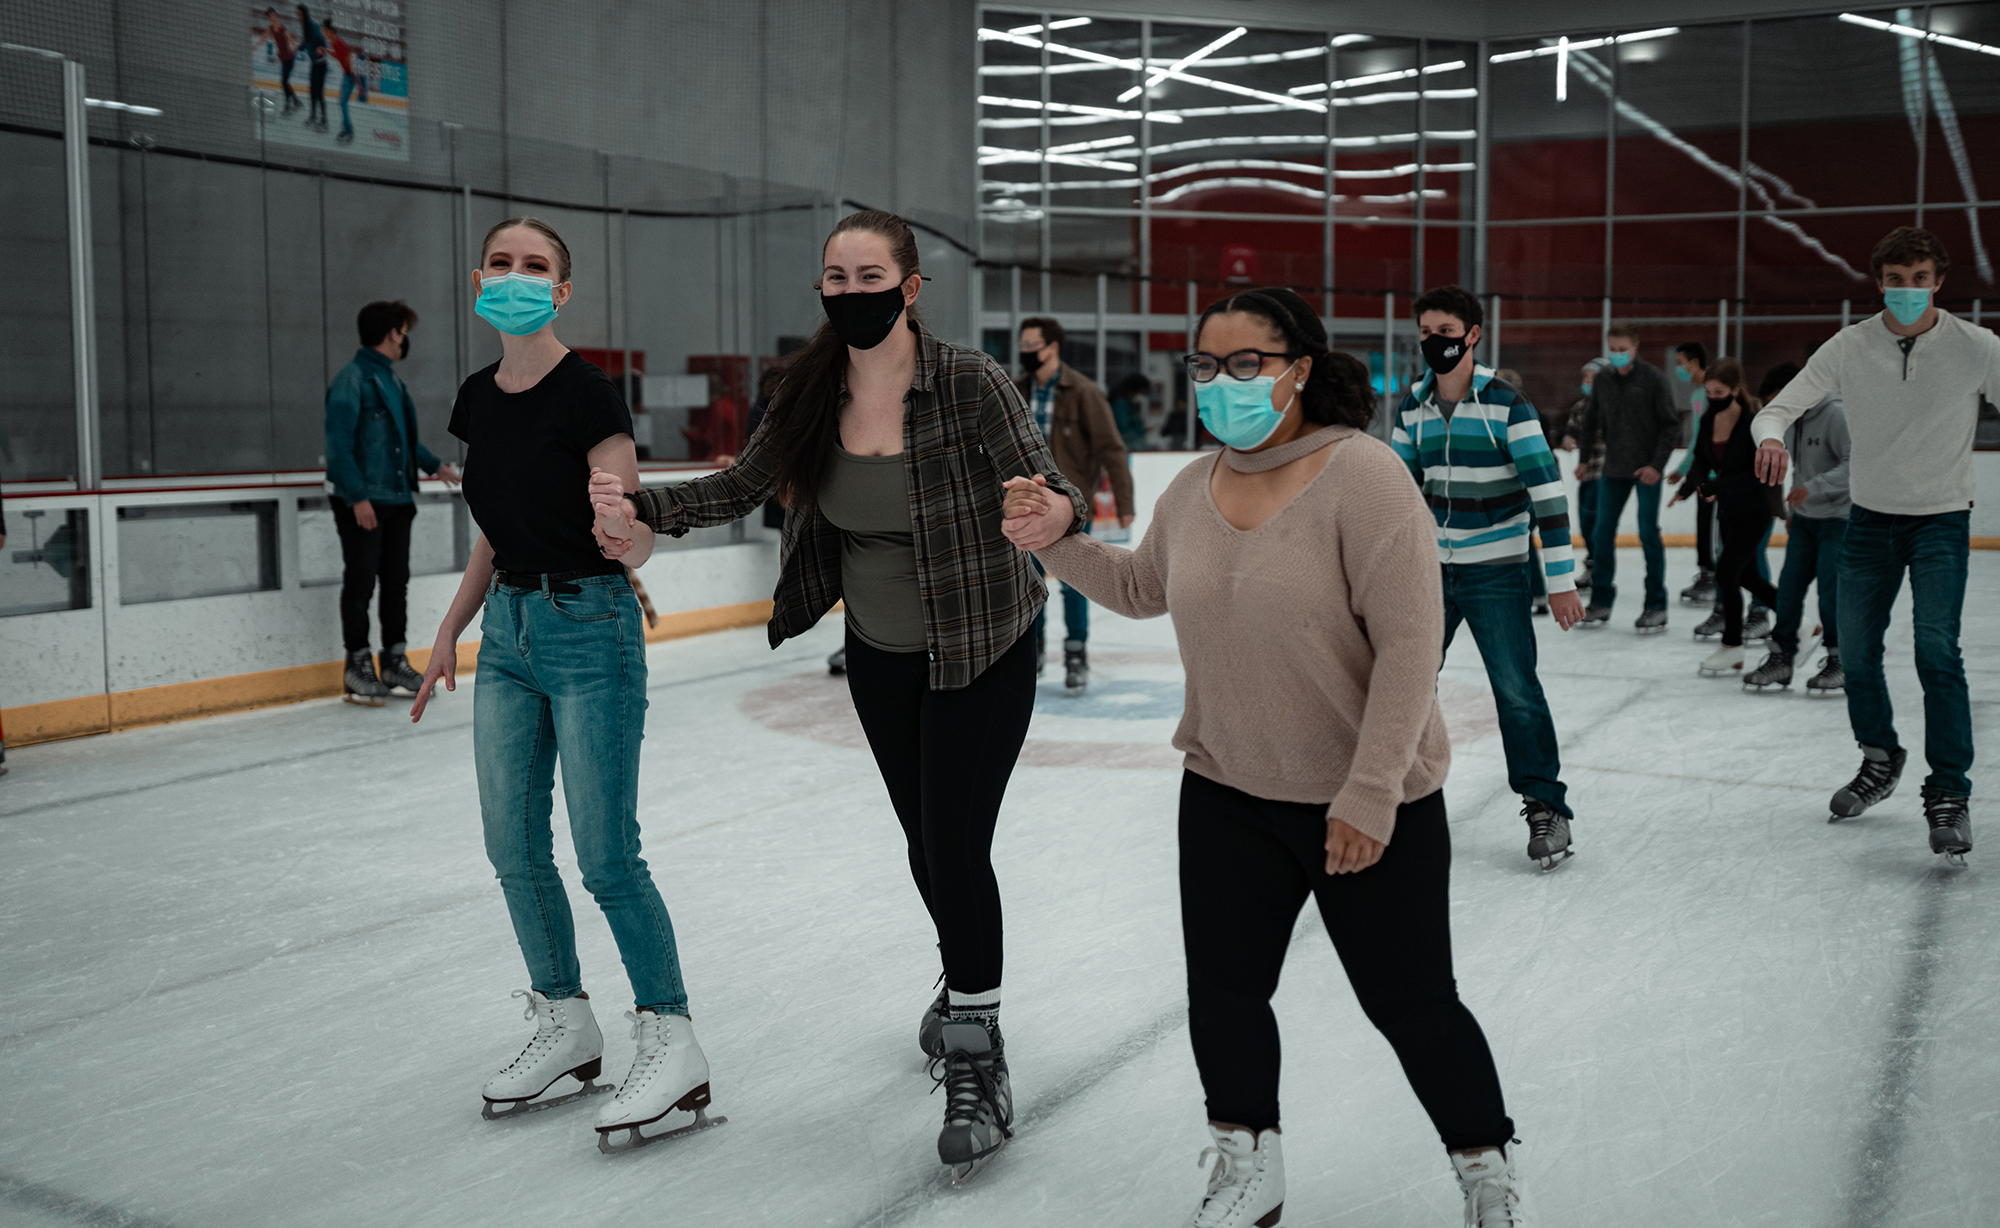 Free Skate Night for UNL students will be Dec. 10, 2021 at the Breslow Ice Center. 